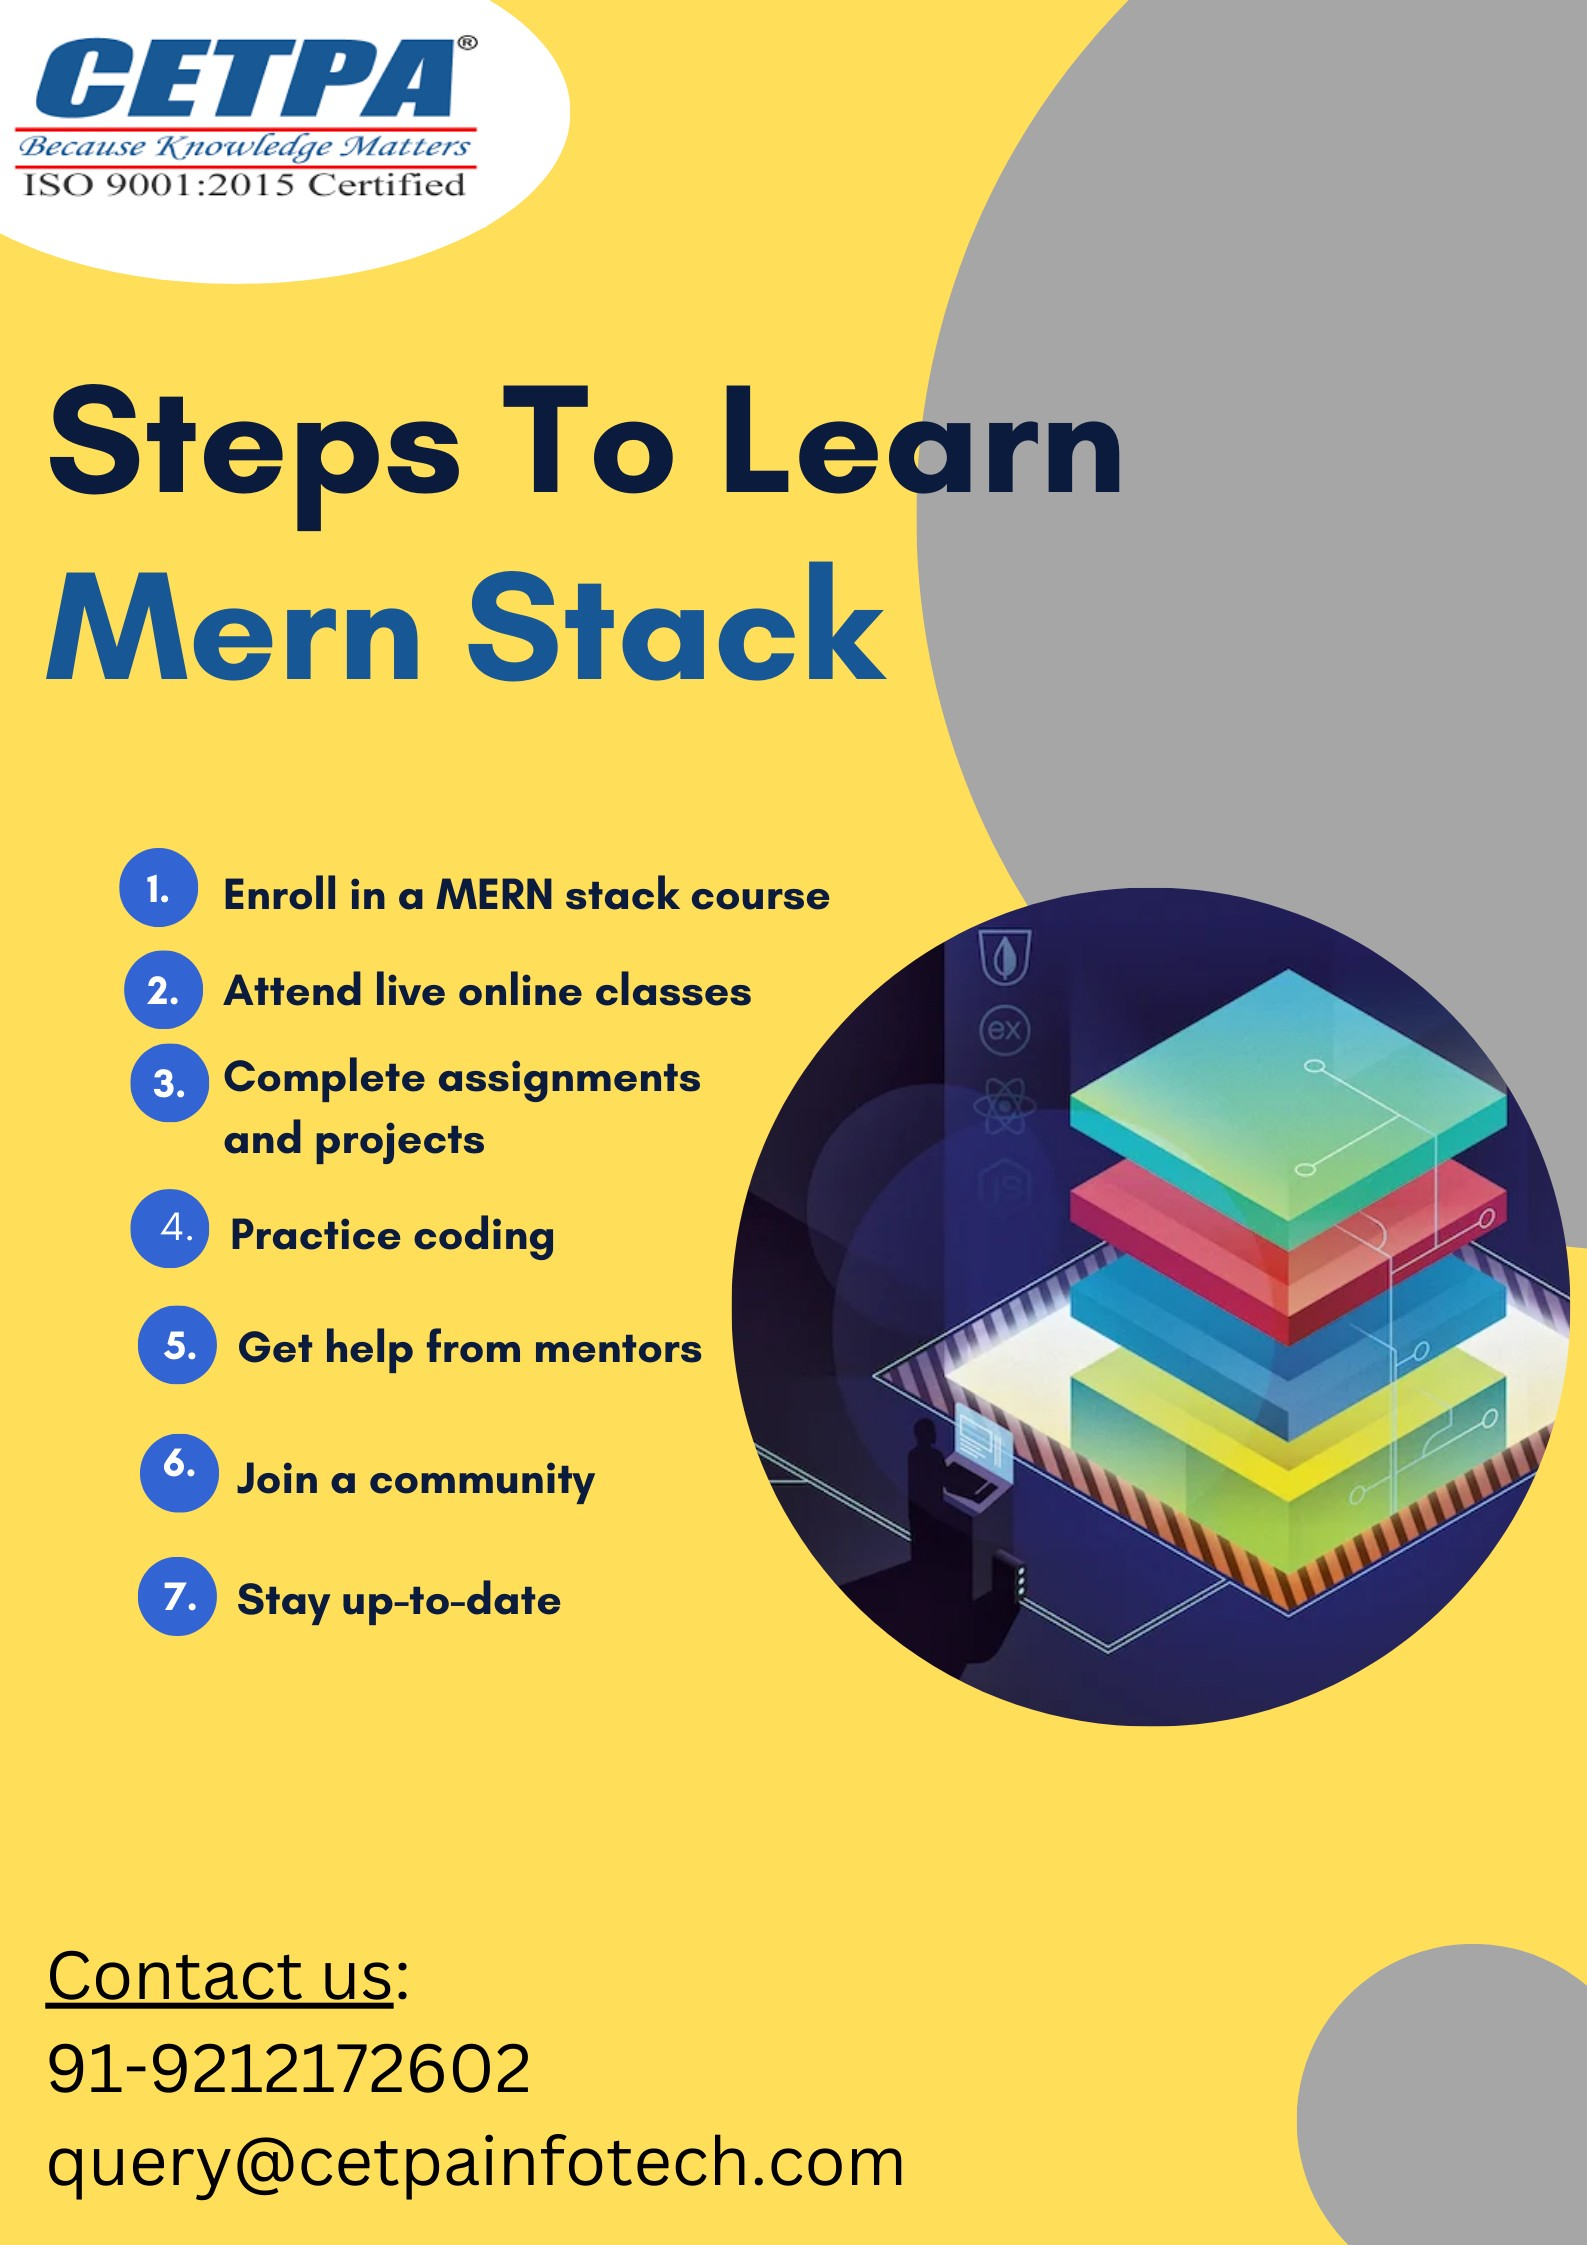 Steps to learn Mern Stack